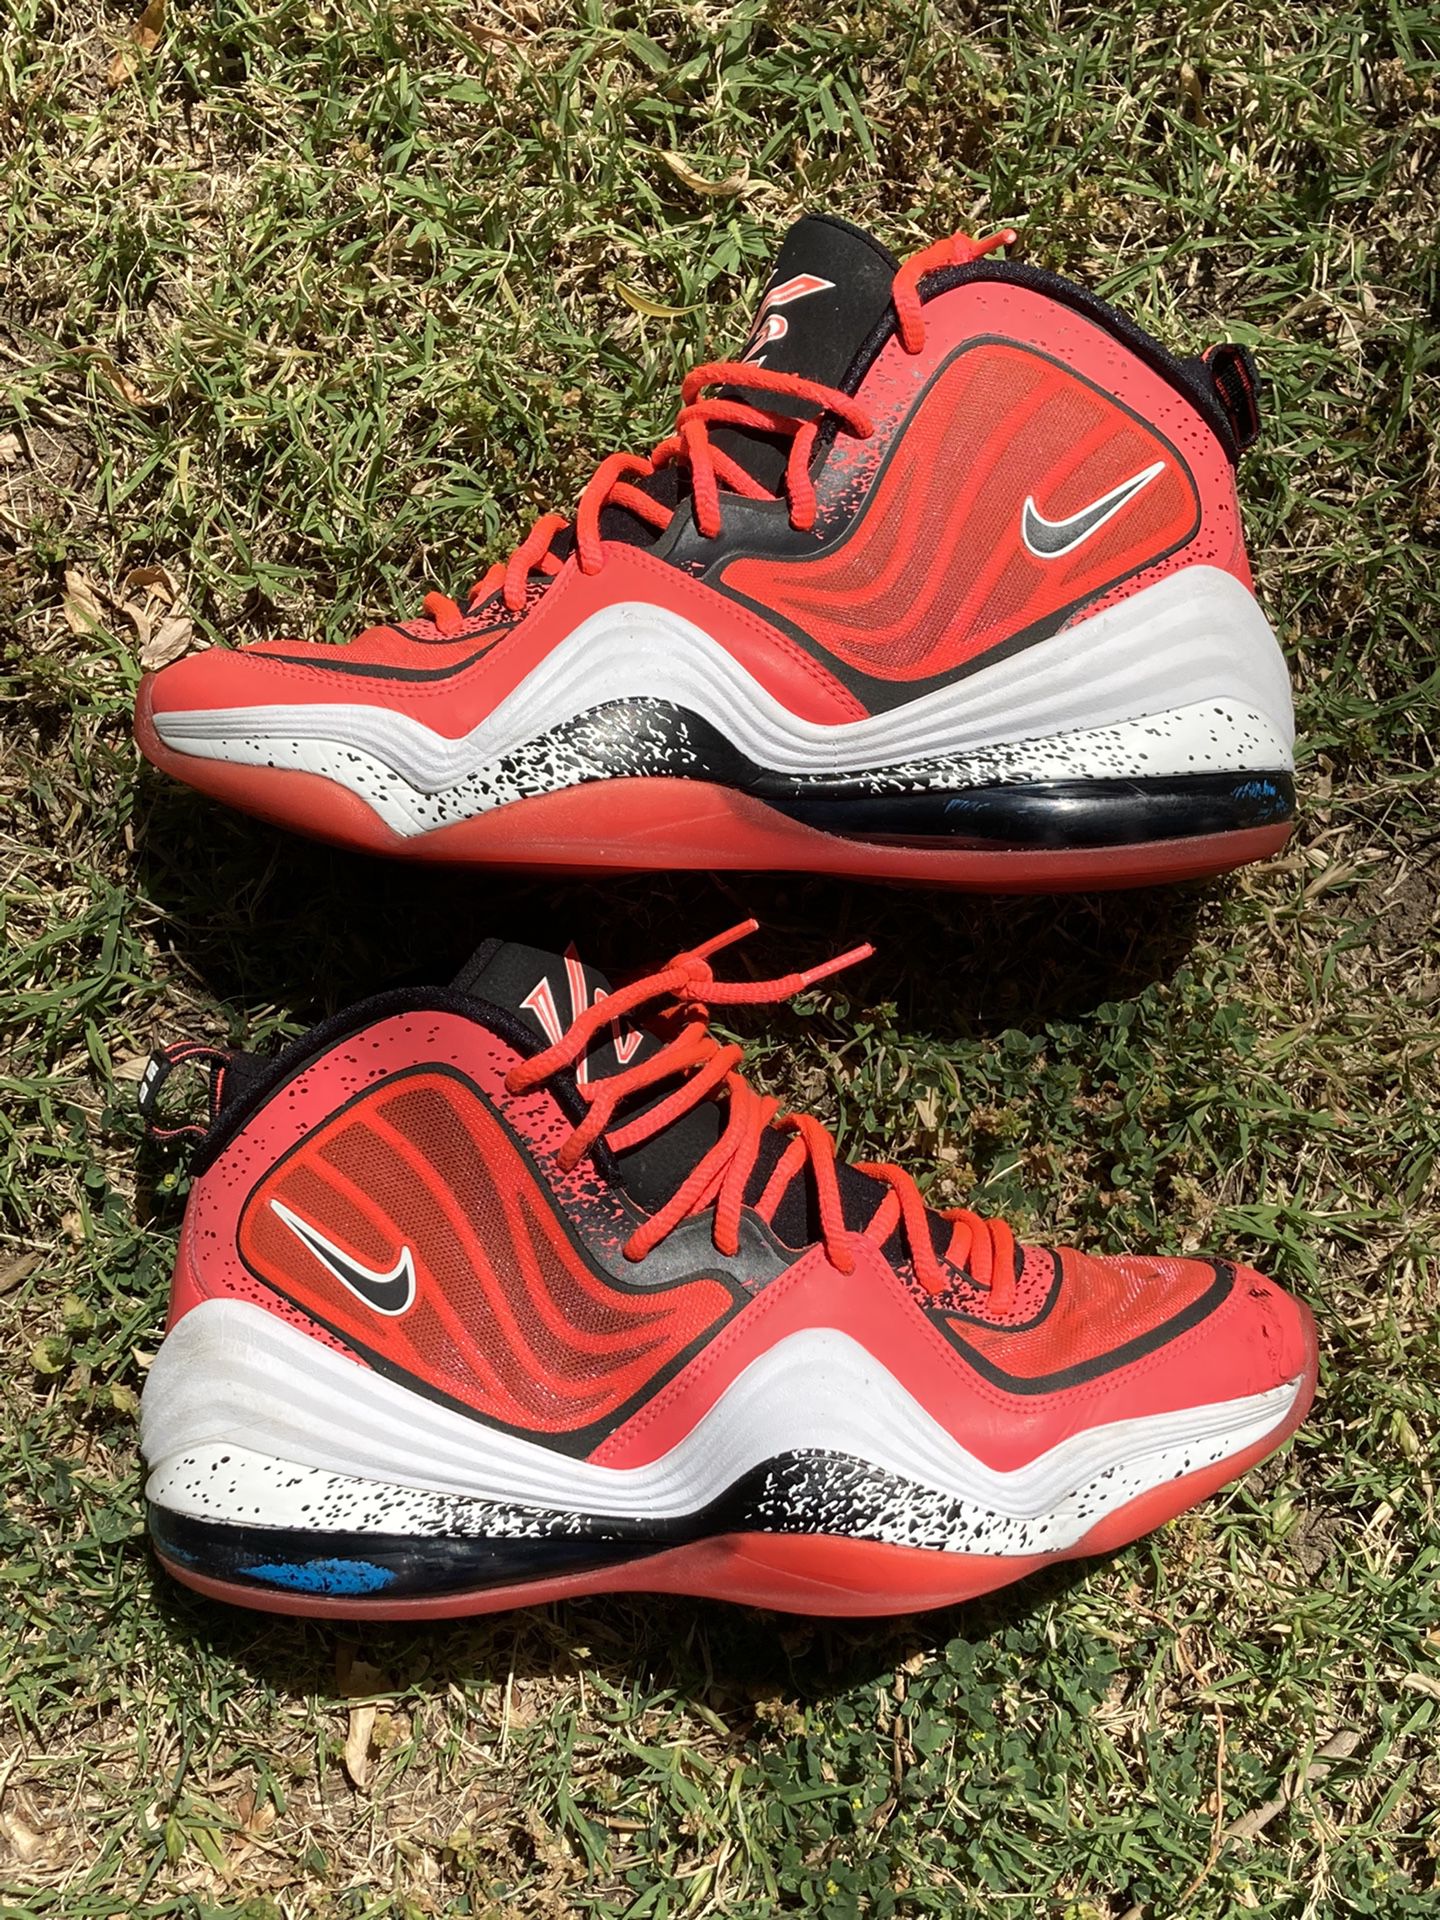 Nike Air Penny 5 “Lil Penny”